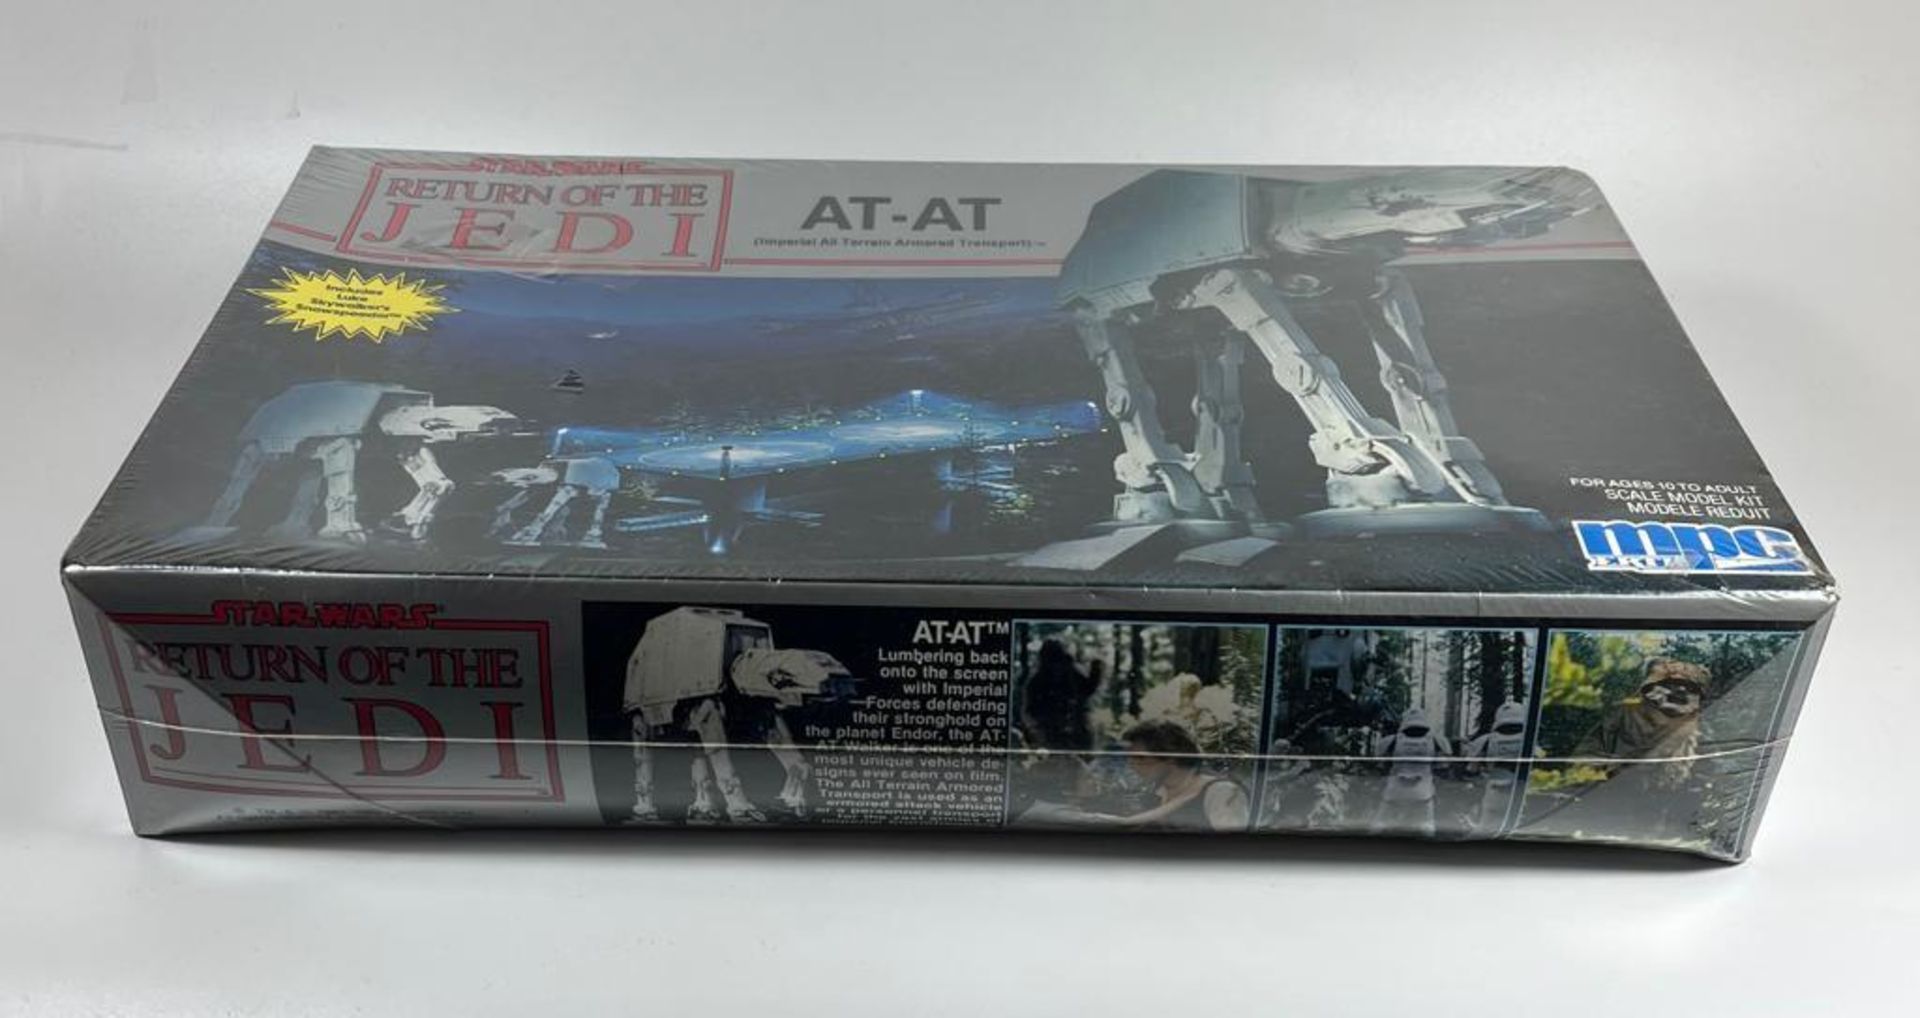 A BOXED AND SEALED ERTL STAR WARS RETURN OF THE JEDI AT-AT MPC SCALE MODEL - Image 3 of 4